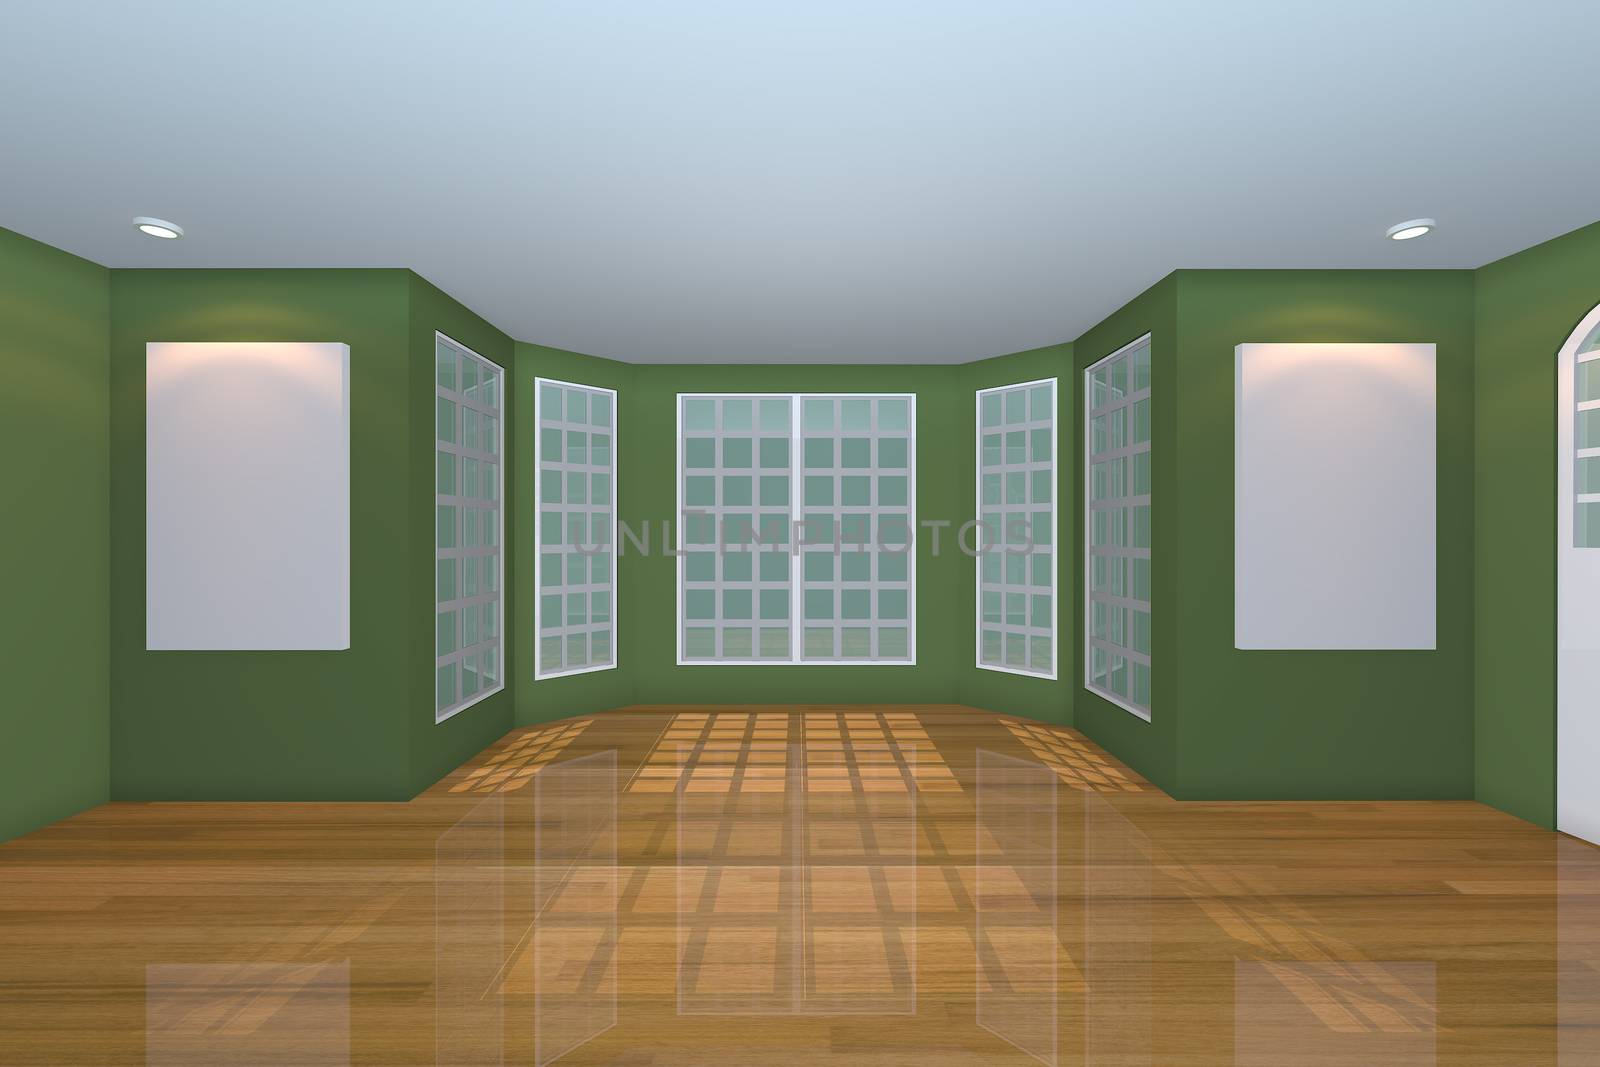 Home interior rendering with empty room color green wall and decorated with wooden floors. 